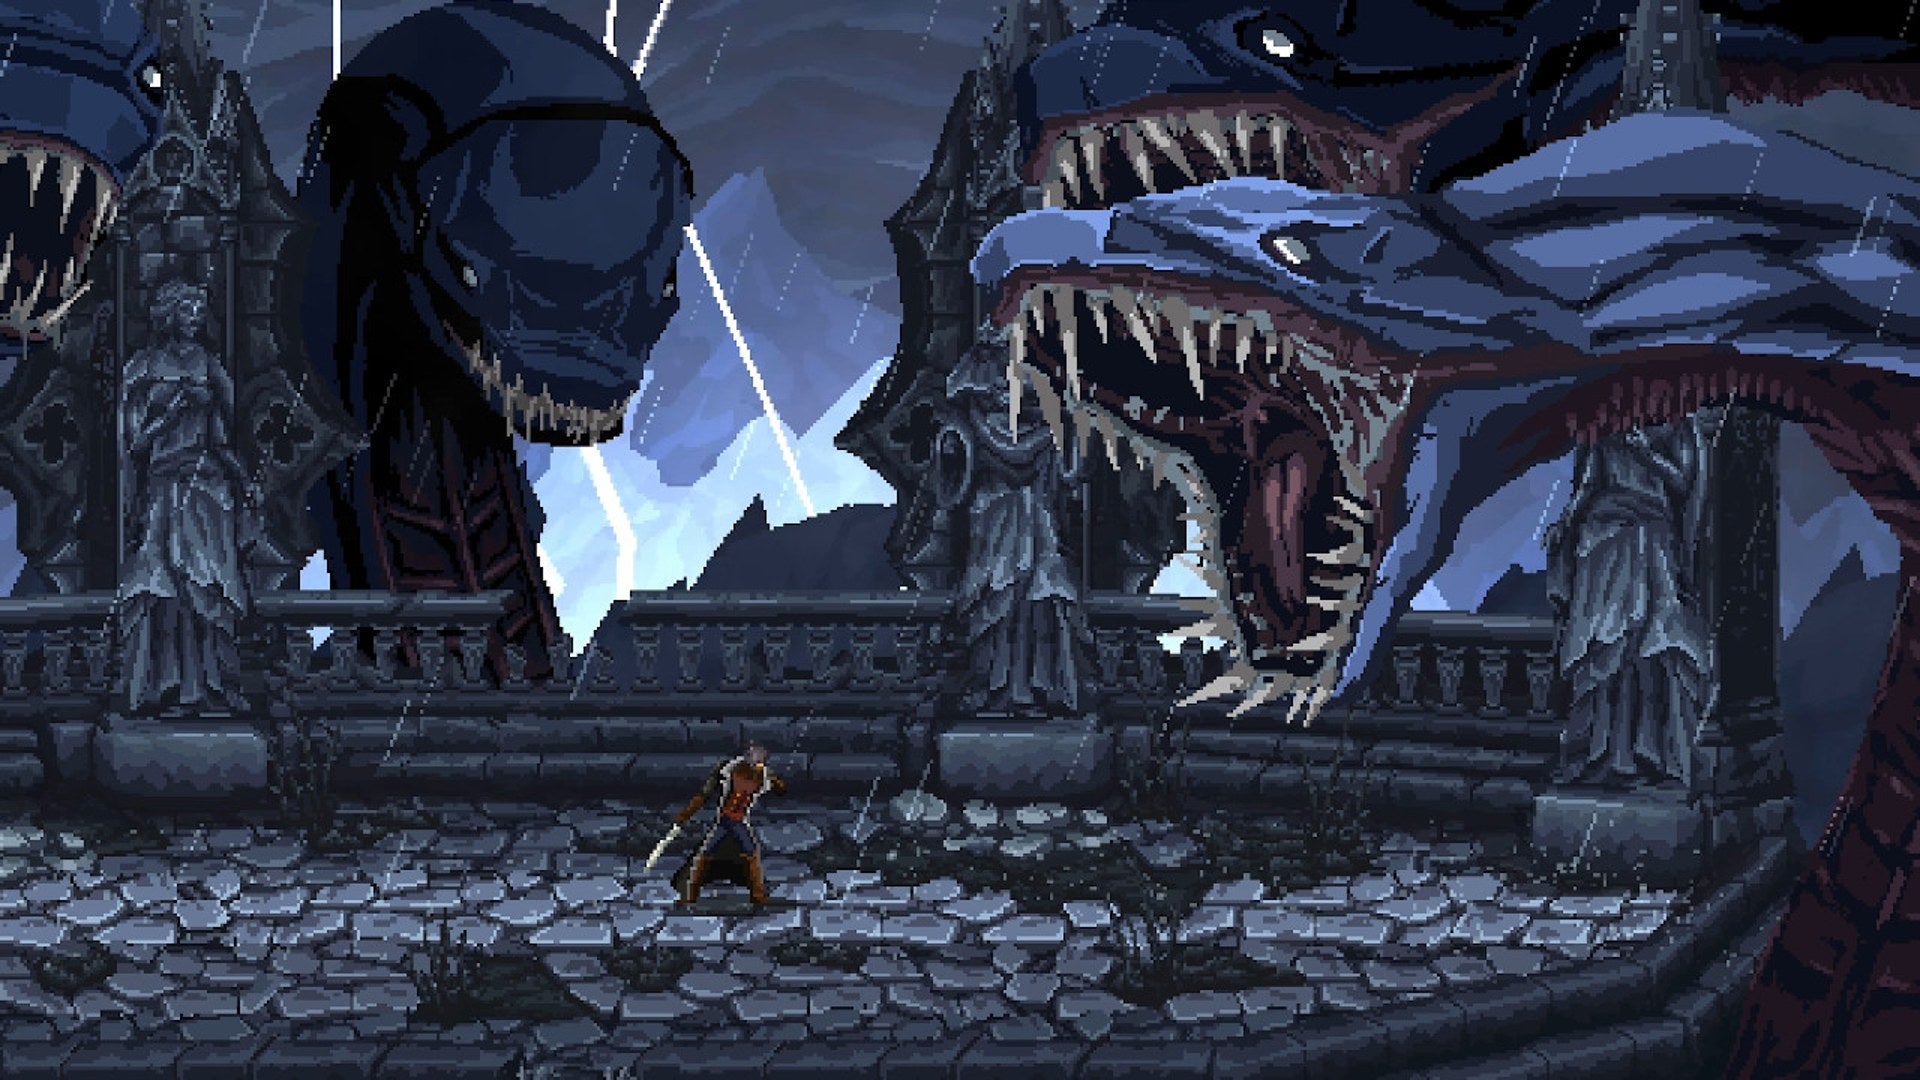 The Last Faith is a side-scrolling platformer in the Metroidvania and Soulslike styles.